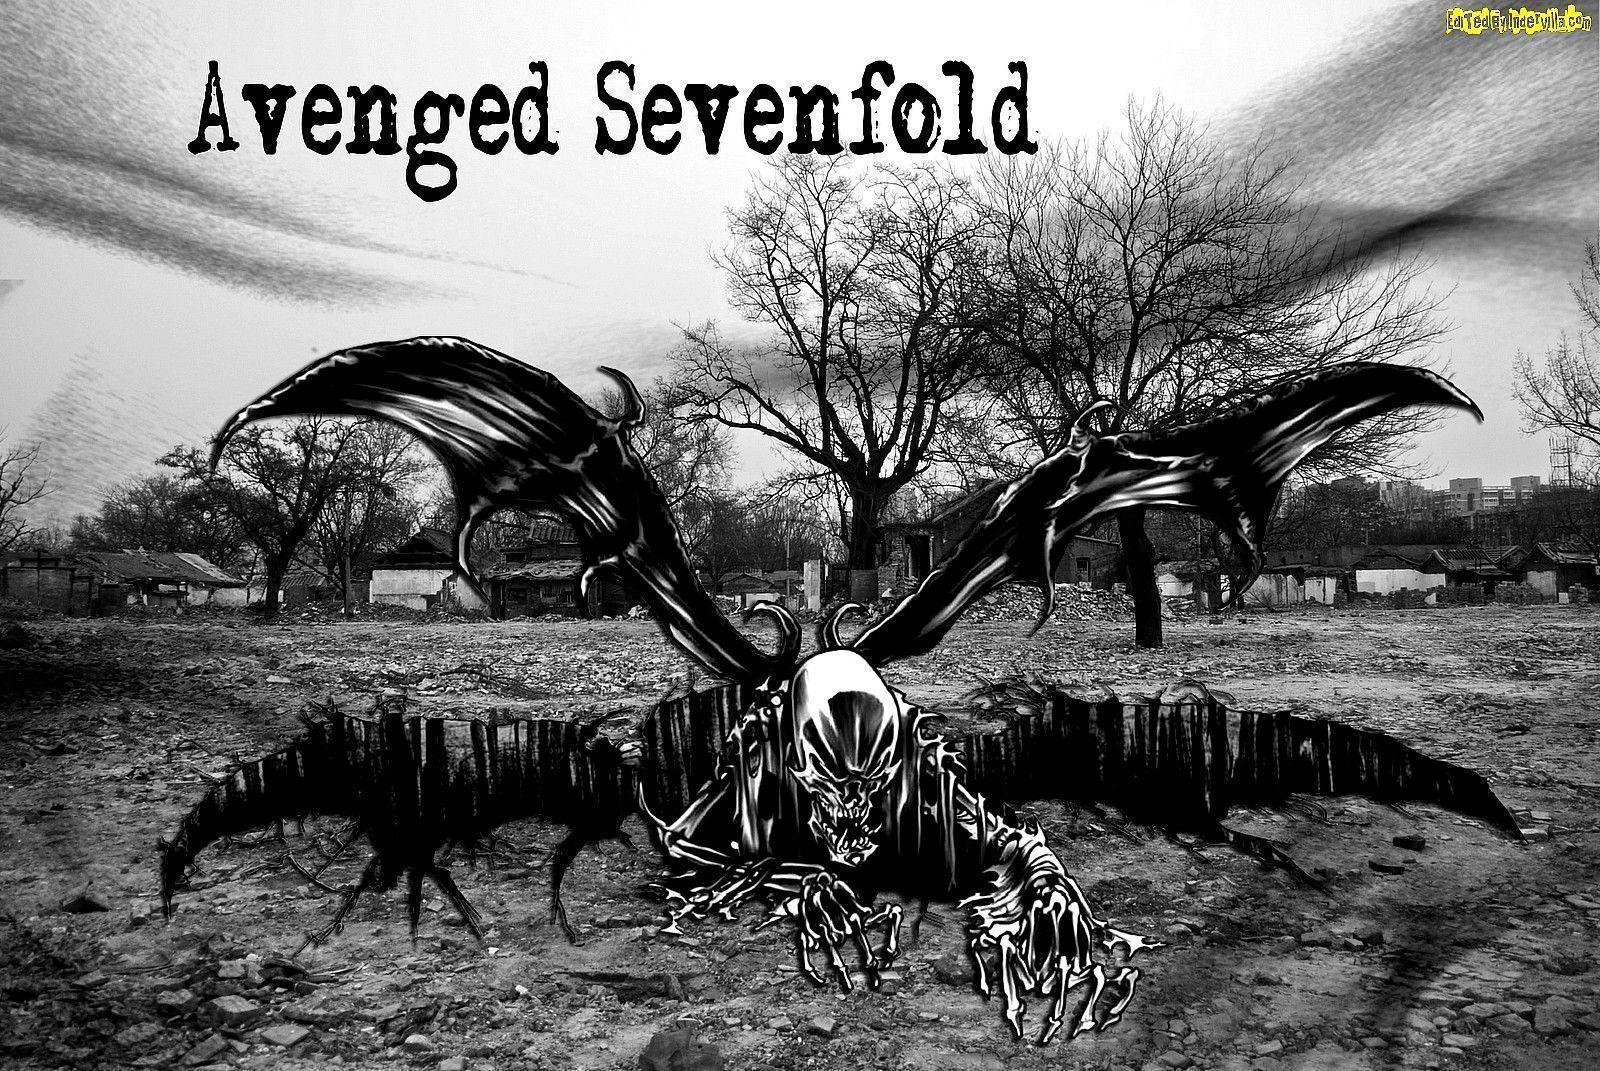 Avenged Sevenfold Wallpapers HD - Wallpaper Cave